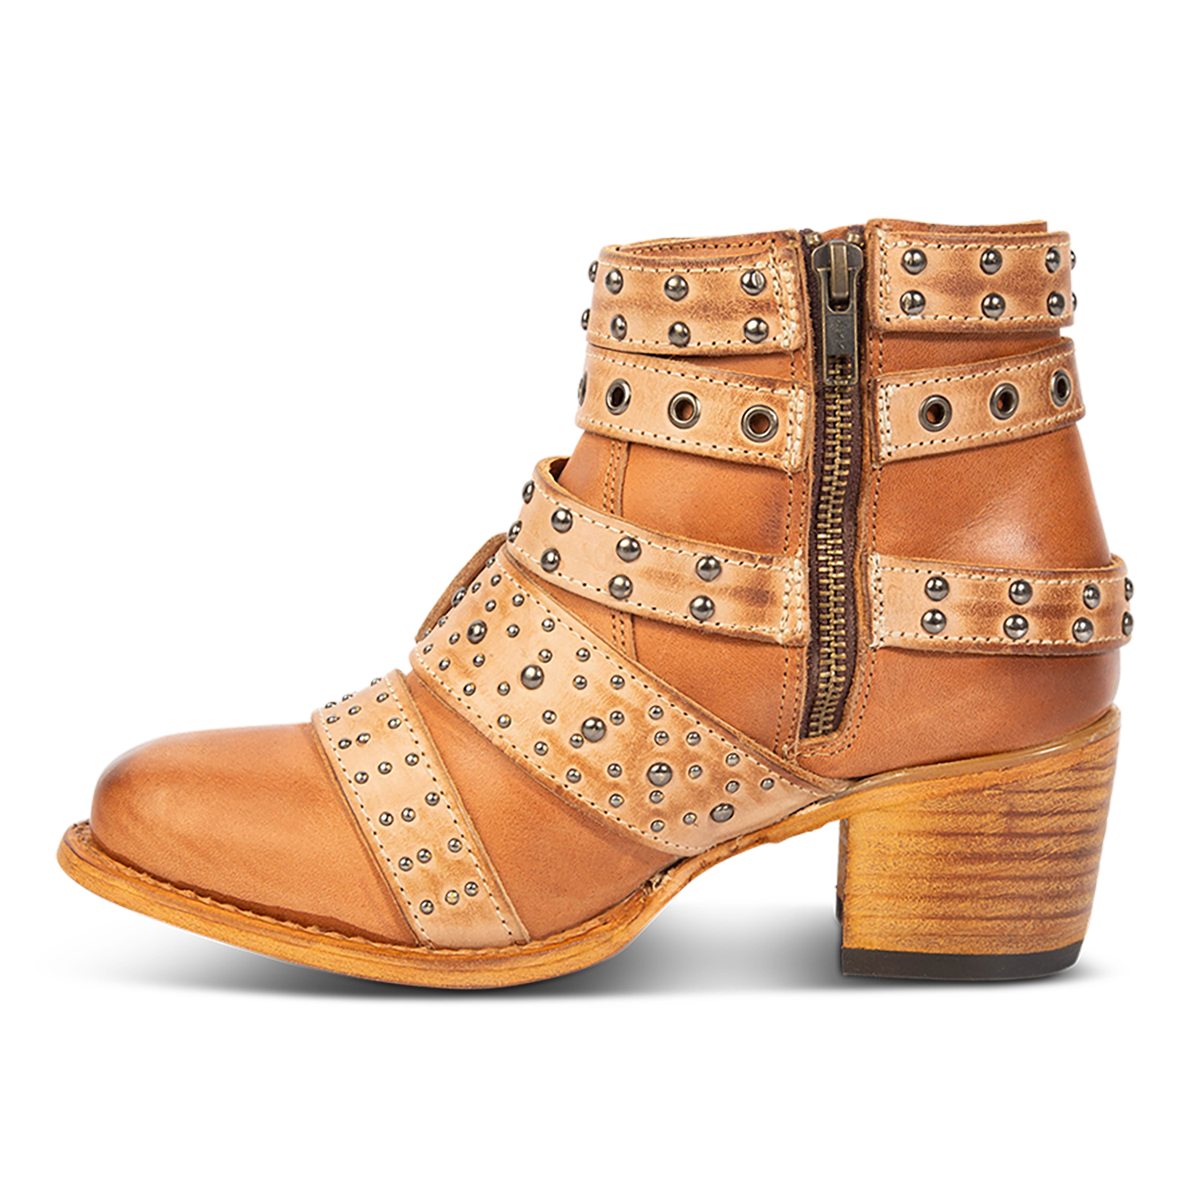 Inside view showing zip closure on FREEBIRD women's Slayer tan multi leather ankle bootie